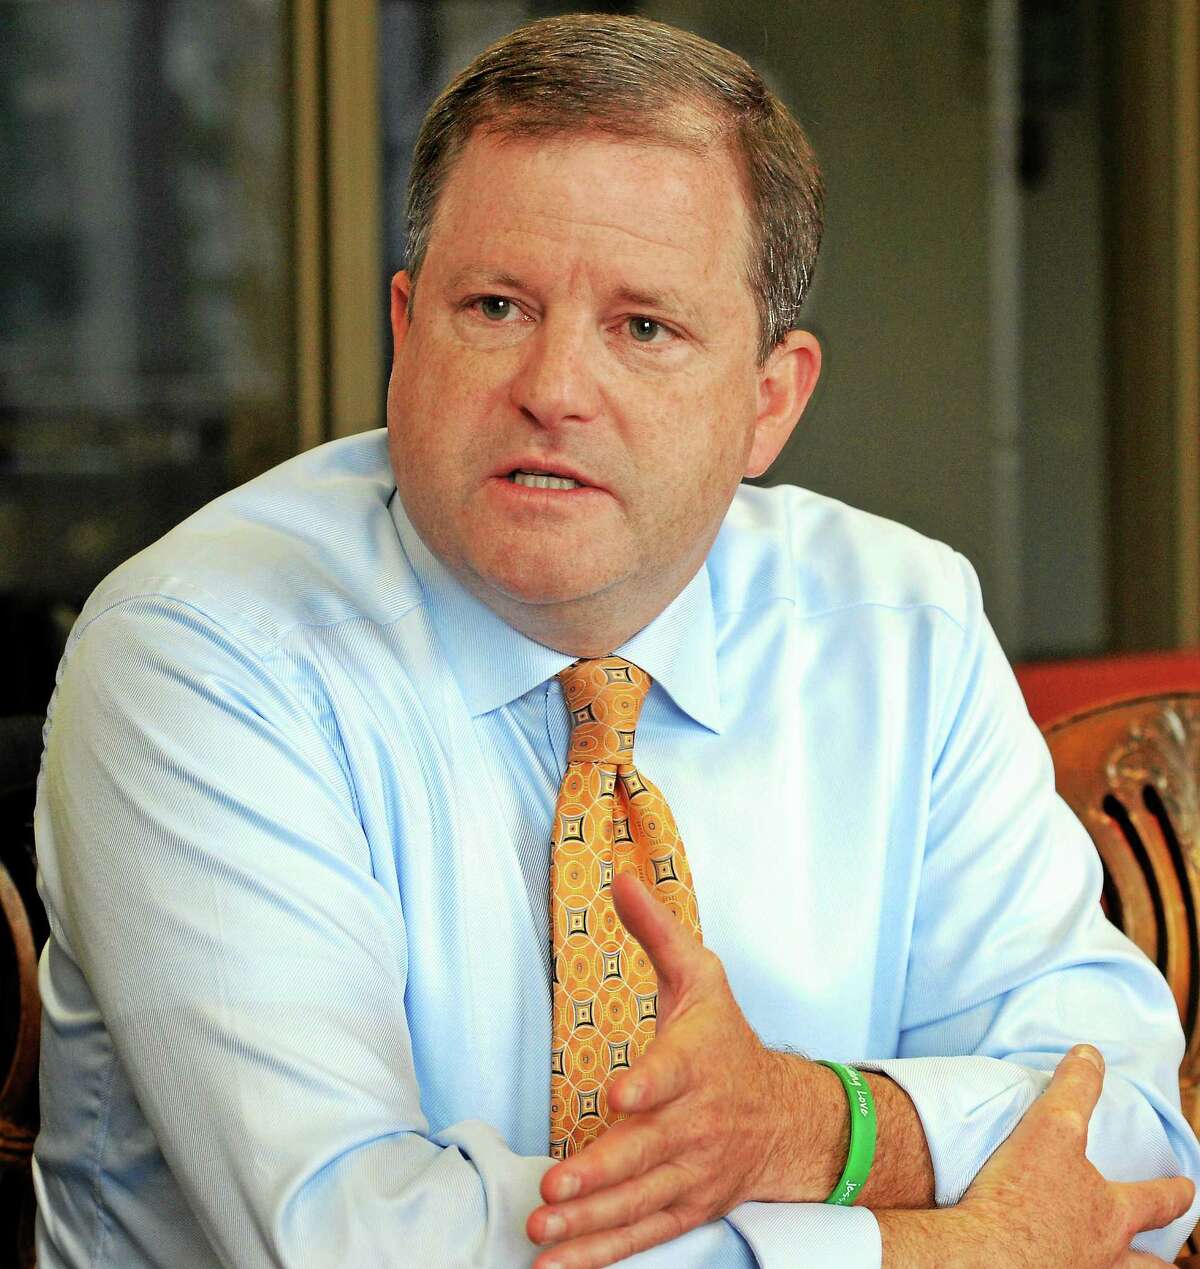 State Sen. John McKinney has been endorsed by both The Hartford Courant and The Day of New London. (Mara Lavitt -- New Haven Register)